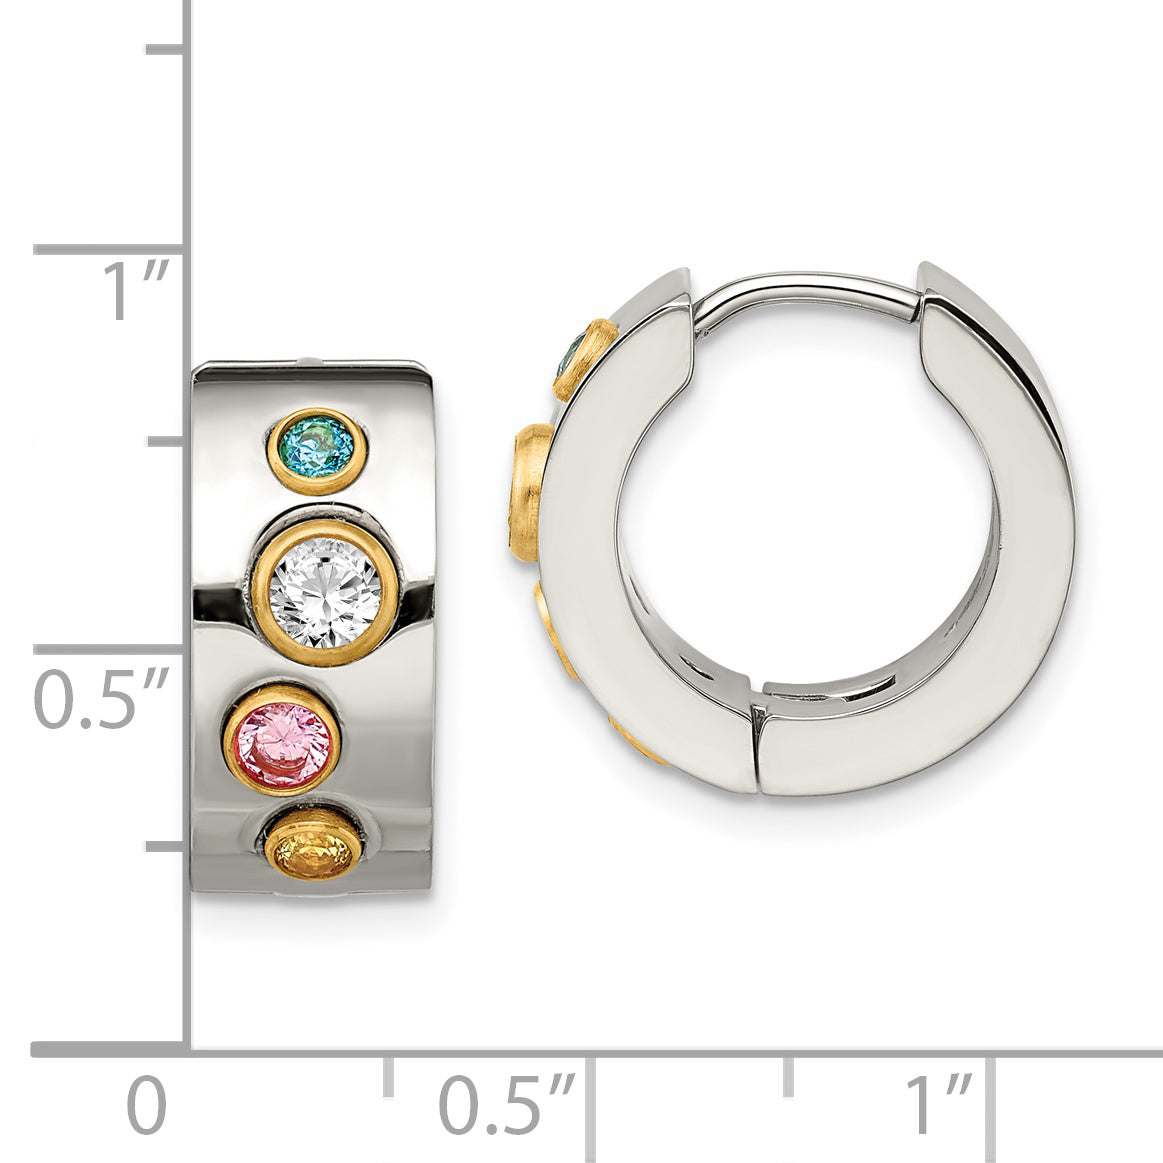 Chisel Stainless Steel Polished Yellow IP-plated with Multicolor CZ 7mm Hinged Hoop Earrings